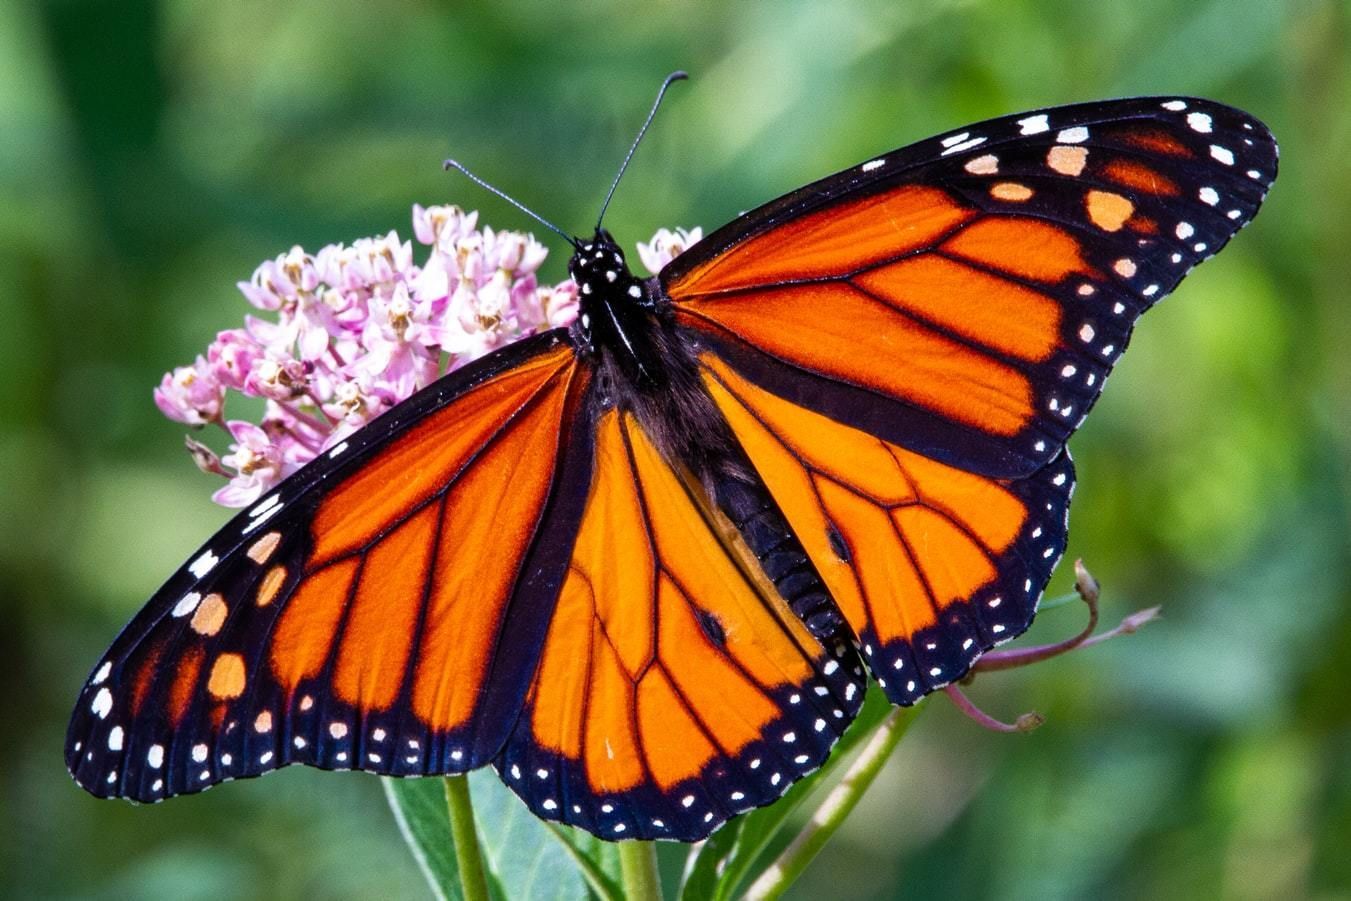 The monarch butterfly is dependent on finding milkweed plants throughout its migration to survive.